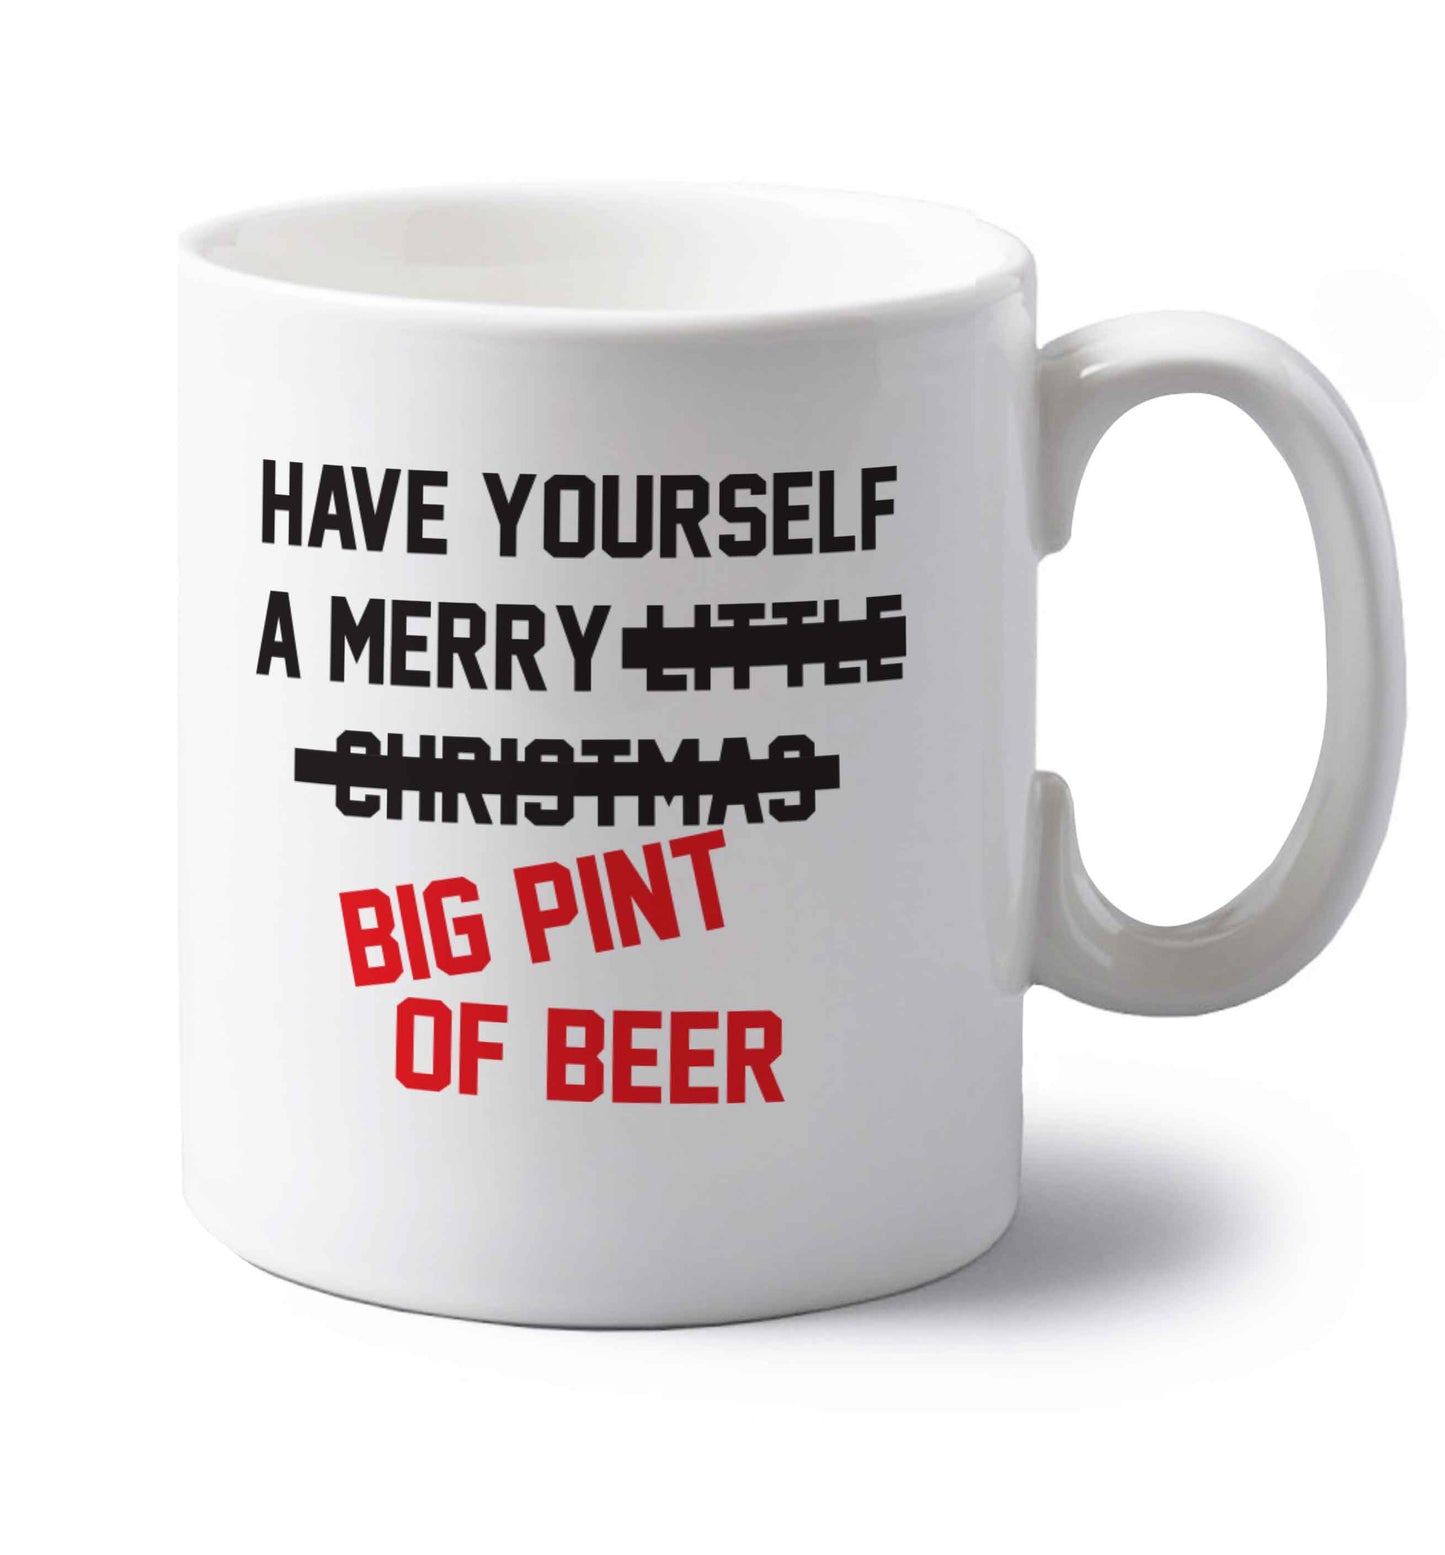 Have yourself a merry big pint of beer left handed white ceramic mug 